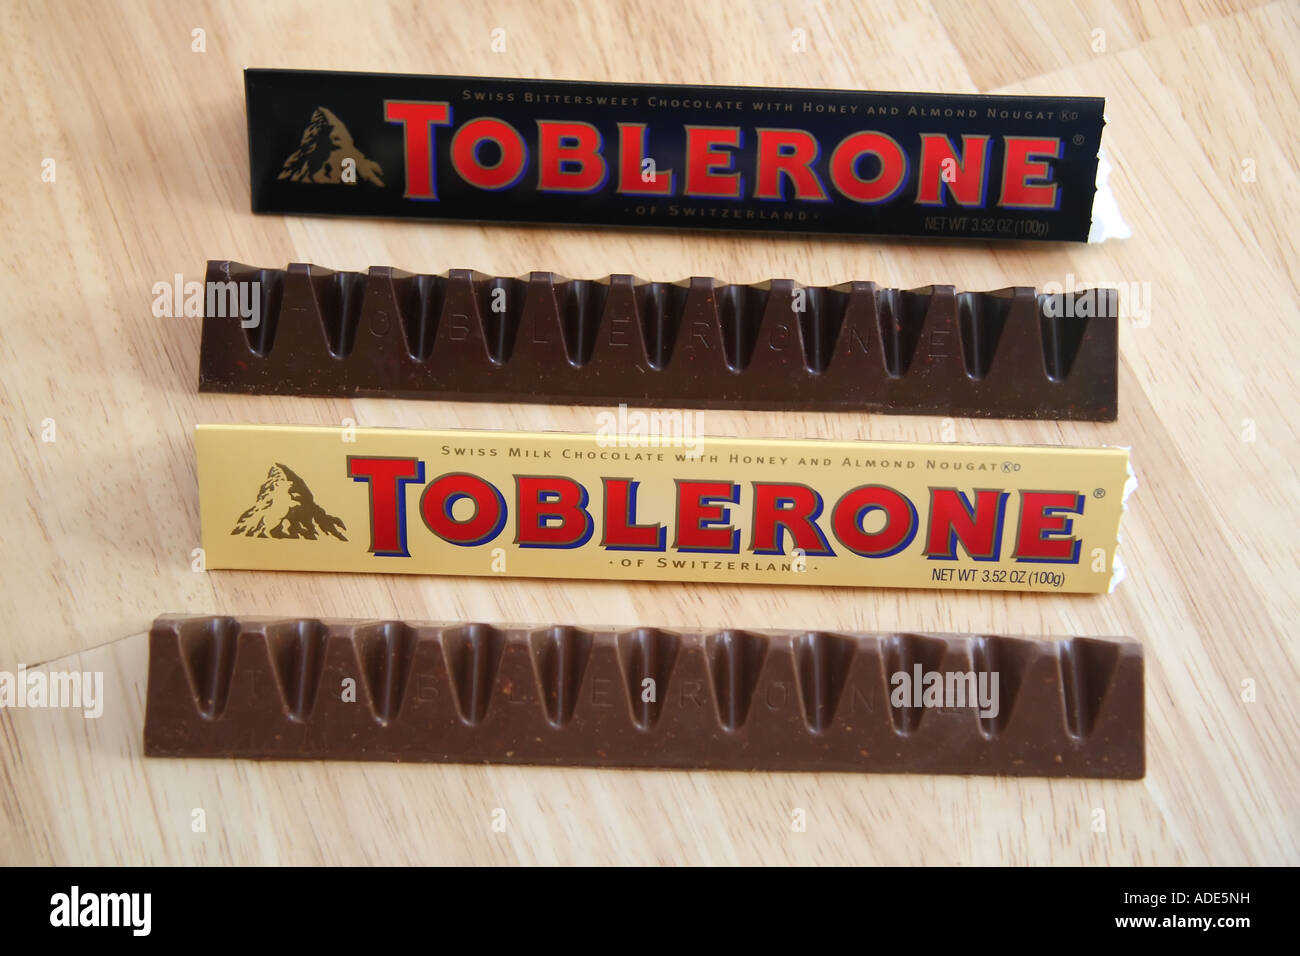 A swiss import, here in the United States, Toblerone chocolate candy bars. Stock Photo